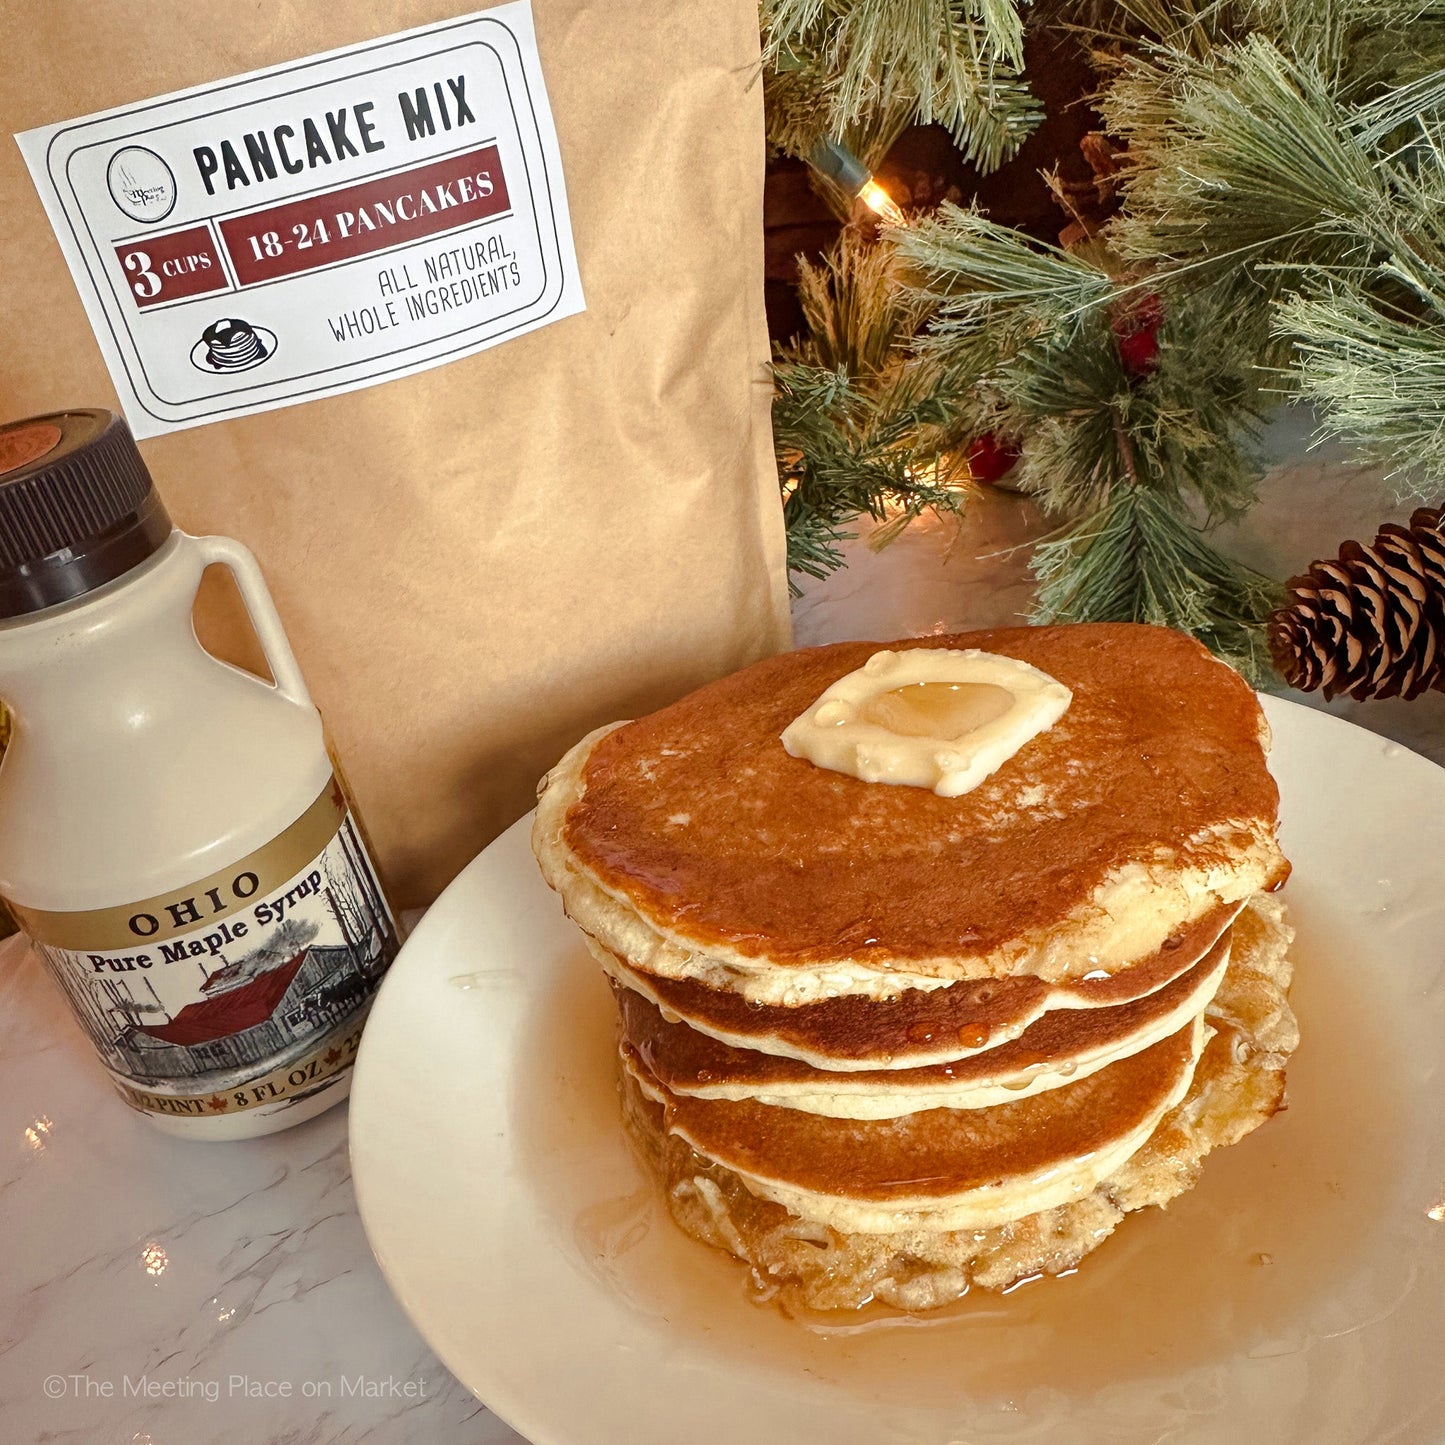 Ohio Maple Syrup, 8 oz. Baked Goods - The Meeting Place on Market